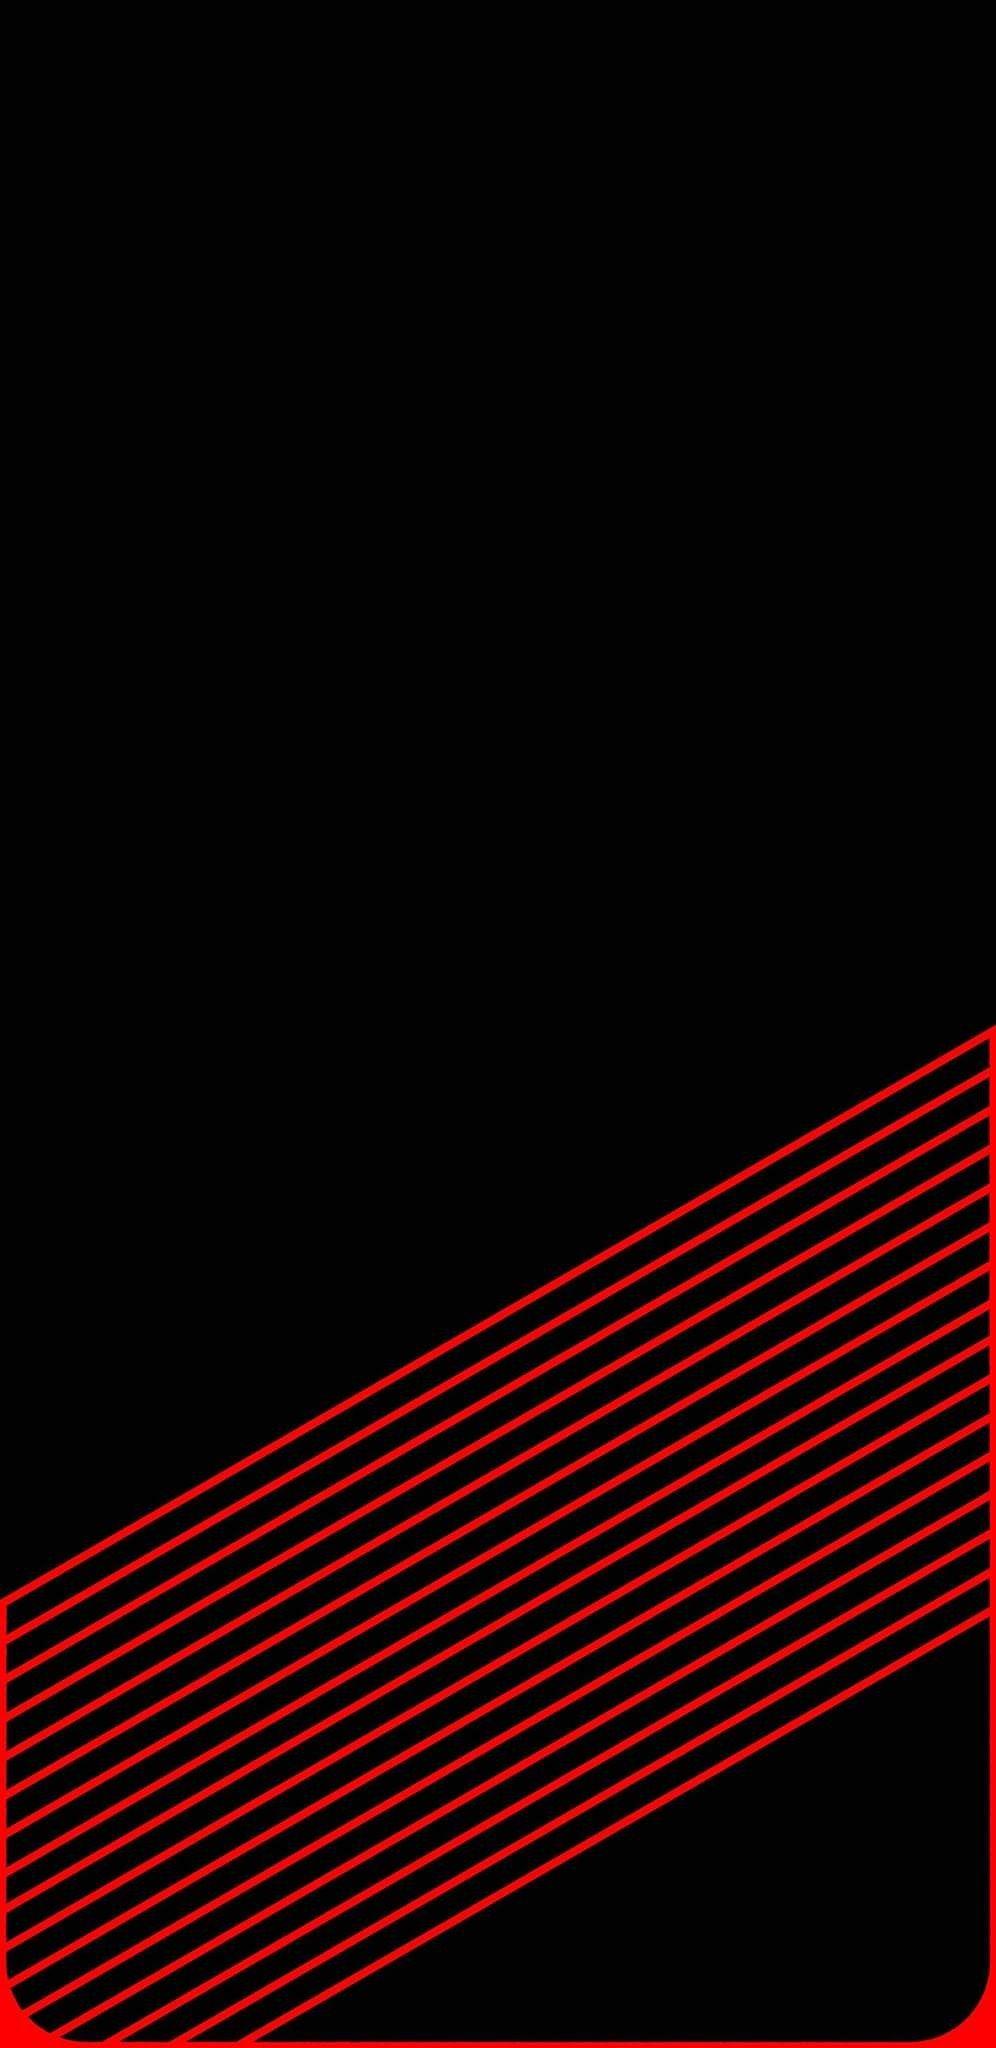 iPhone Wallpaper. Red, Black, Line, Pattern, Parallel